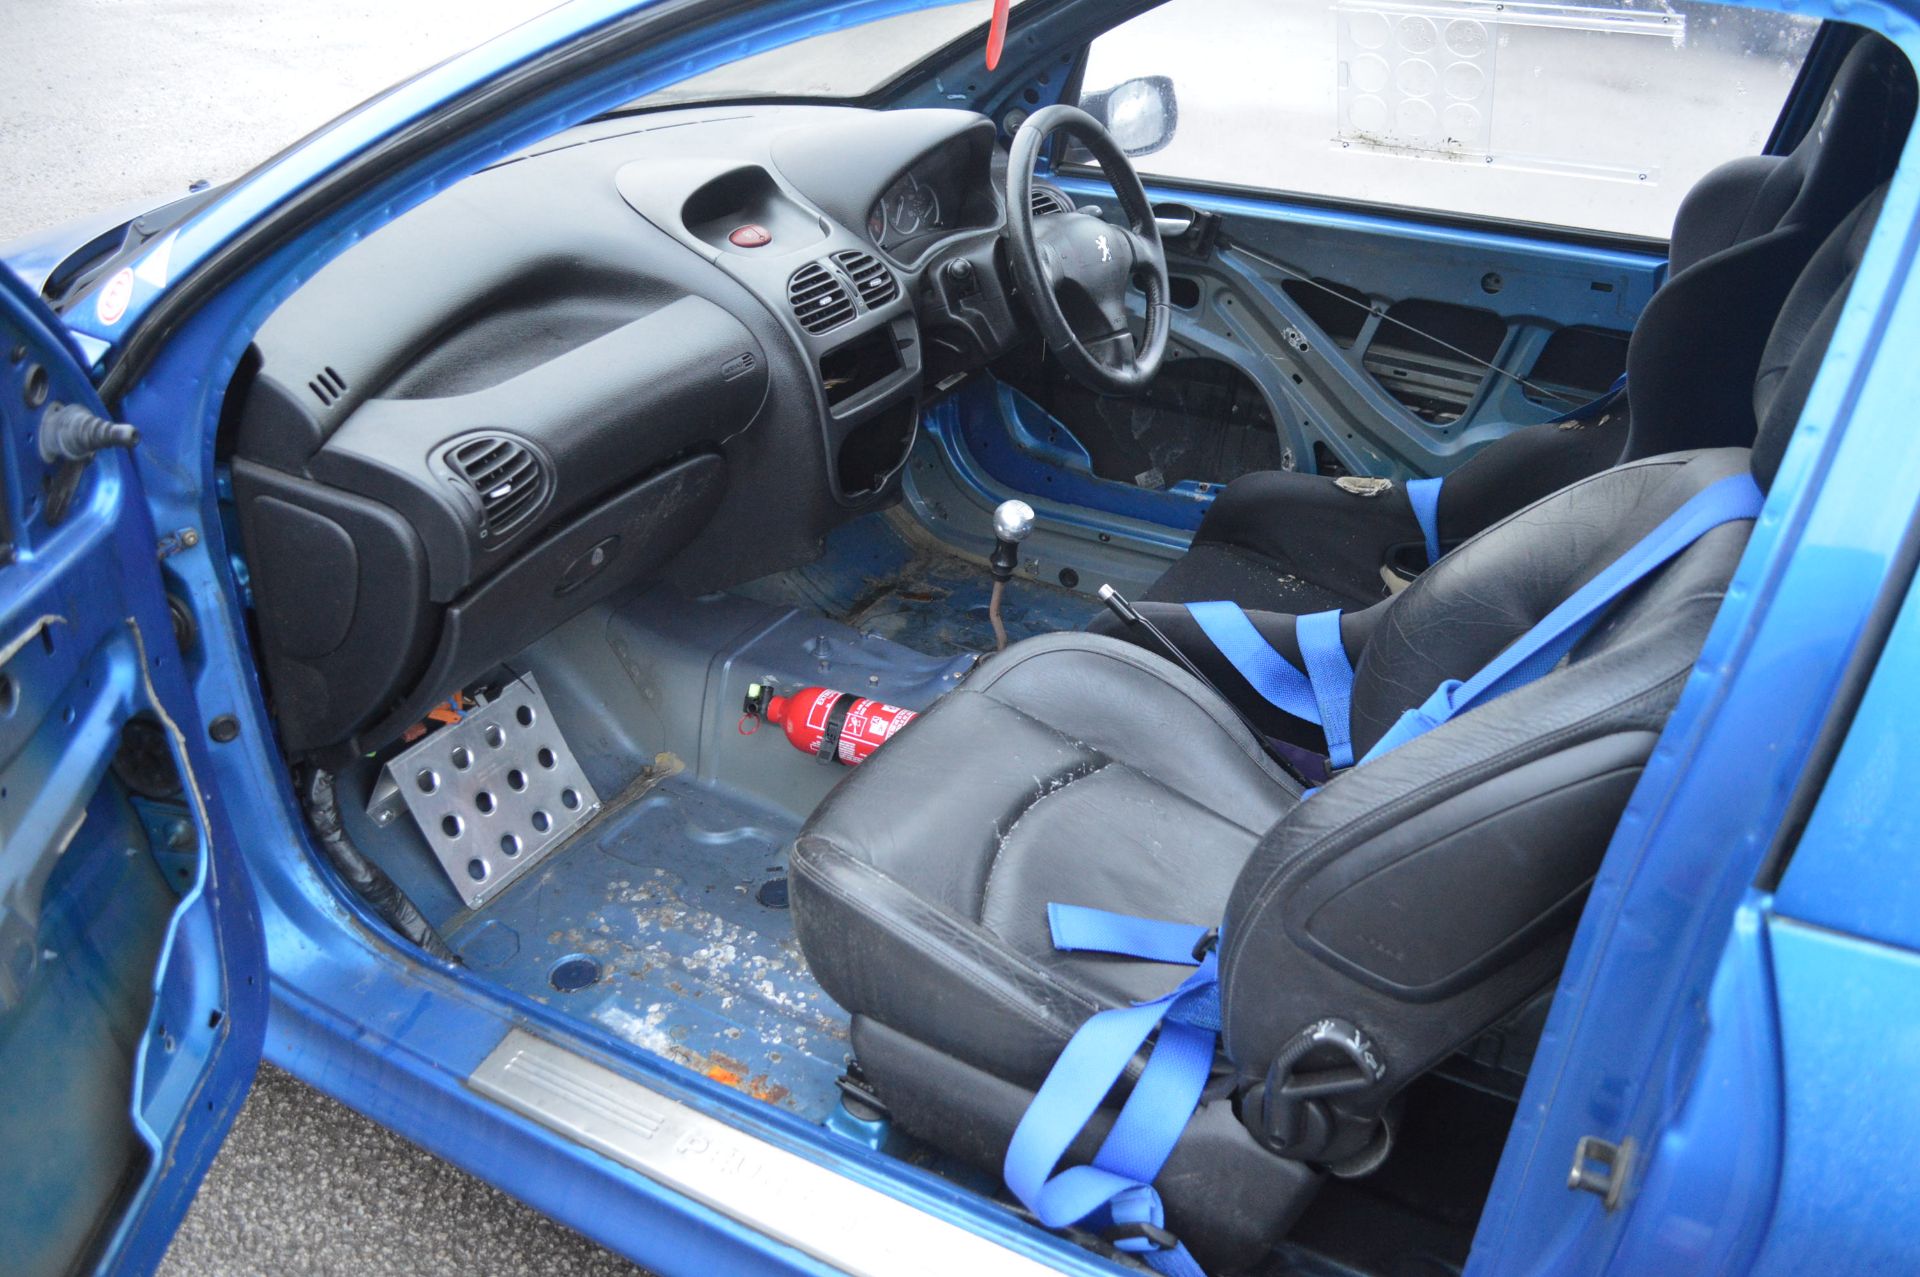 2003/03 REG PEUGEOT 206 GTI 180HP FAST TRACK DAY CAR  HAS THE 'VAN' PANELS FITTED INSTEAD OF REAR - Image 8 of 14